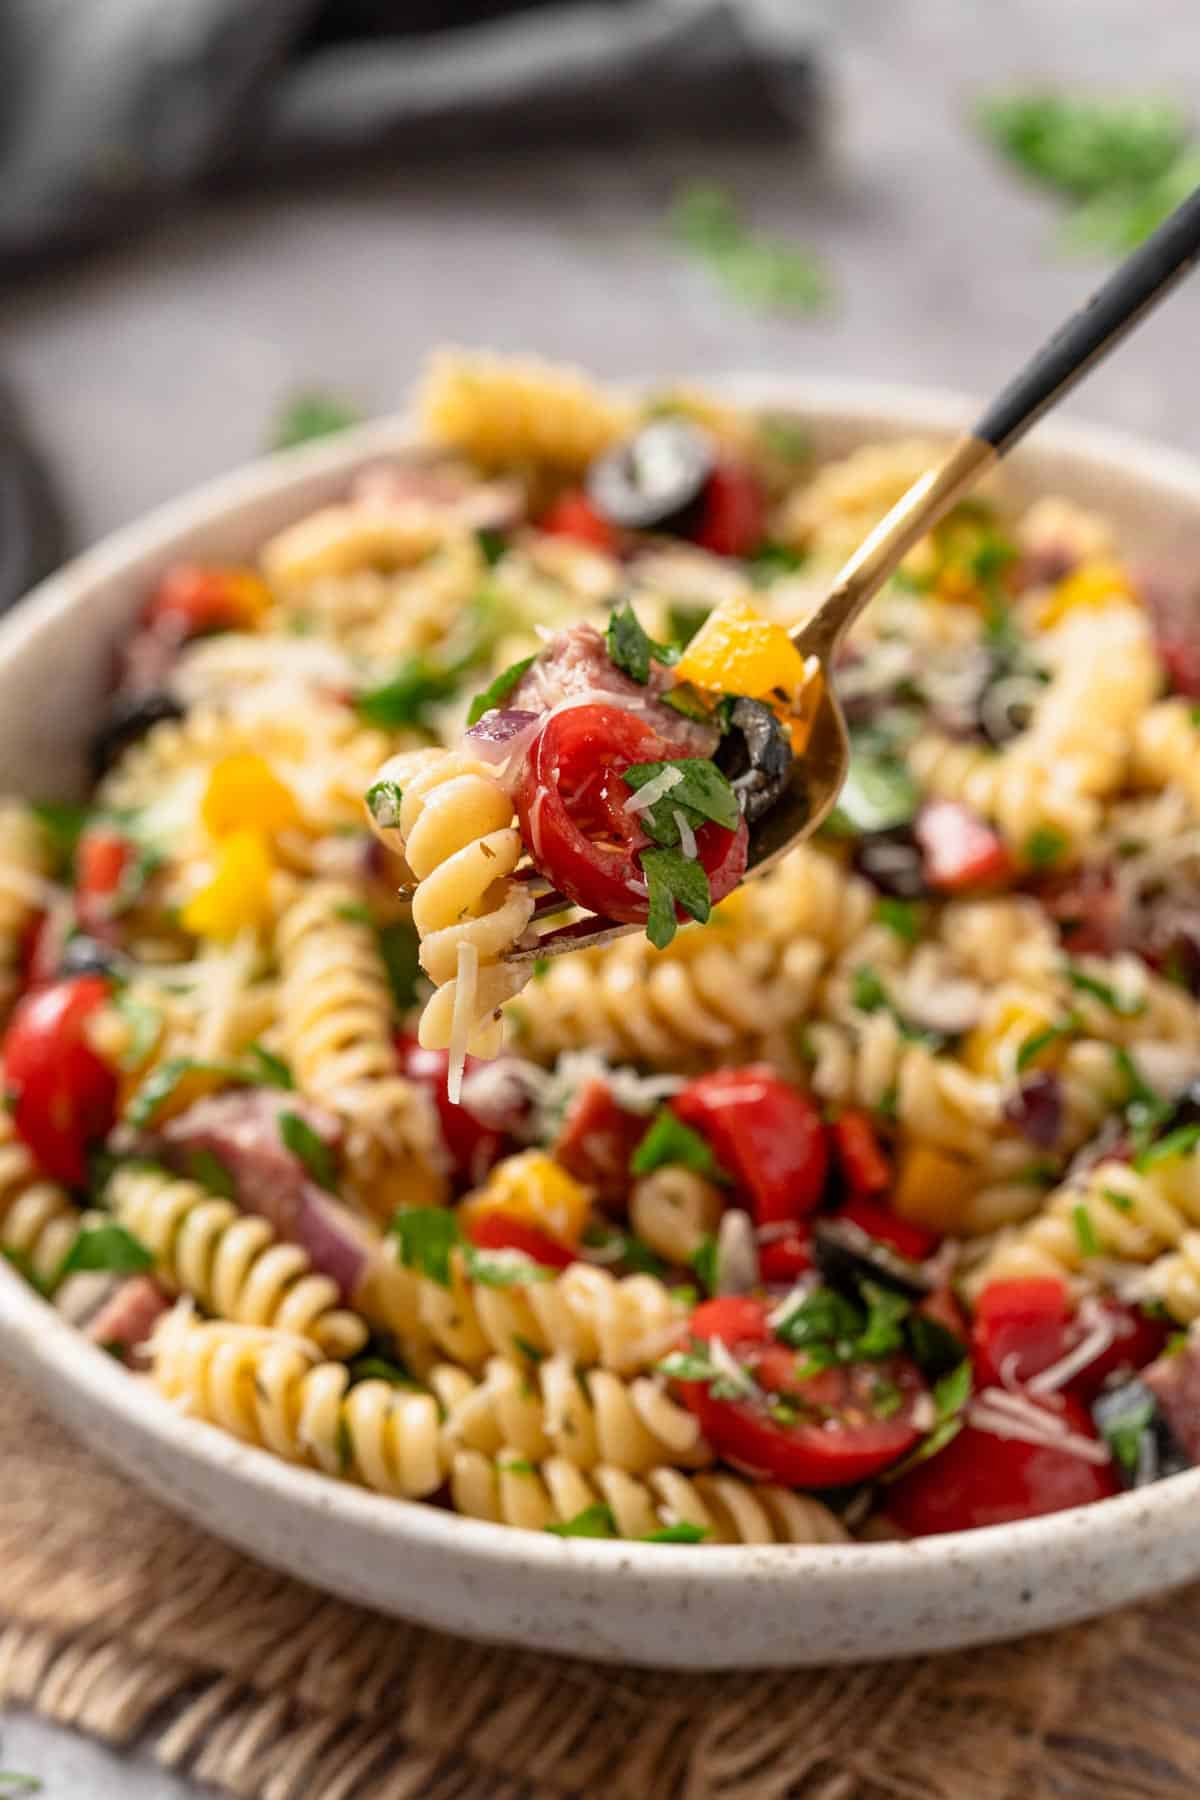 Cold Pasta Salad With Smoked Sausage-The Yummy BowlA simple and savory cold pasta salad made with smoked sausage (or salami), veggies, gluten free pasta and Oregano Mustard Vinaigrette salad dressing. Can be served hot or cold to fit any season! #pastasalad #italianpastasalad #easypastasalad #pastasaladdressing